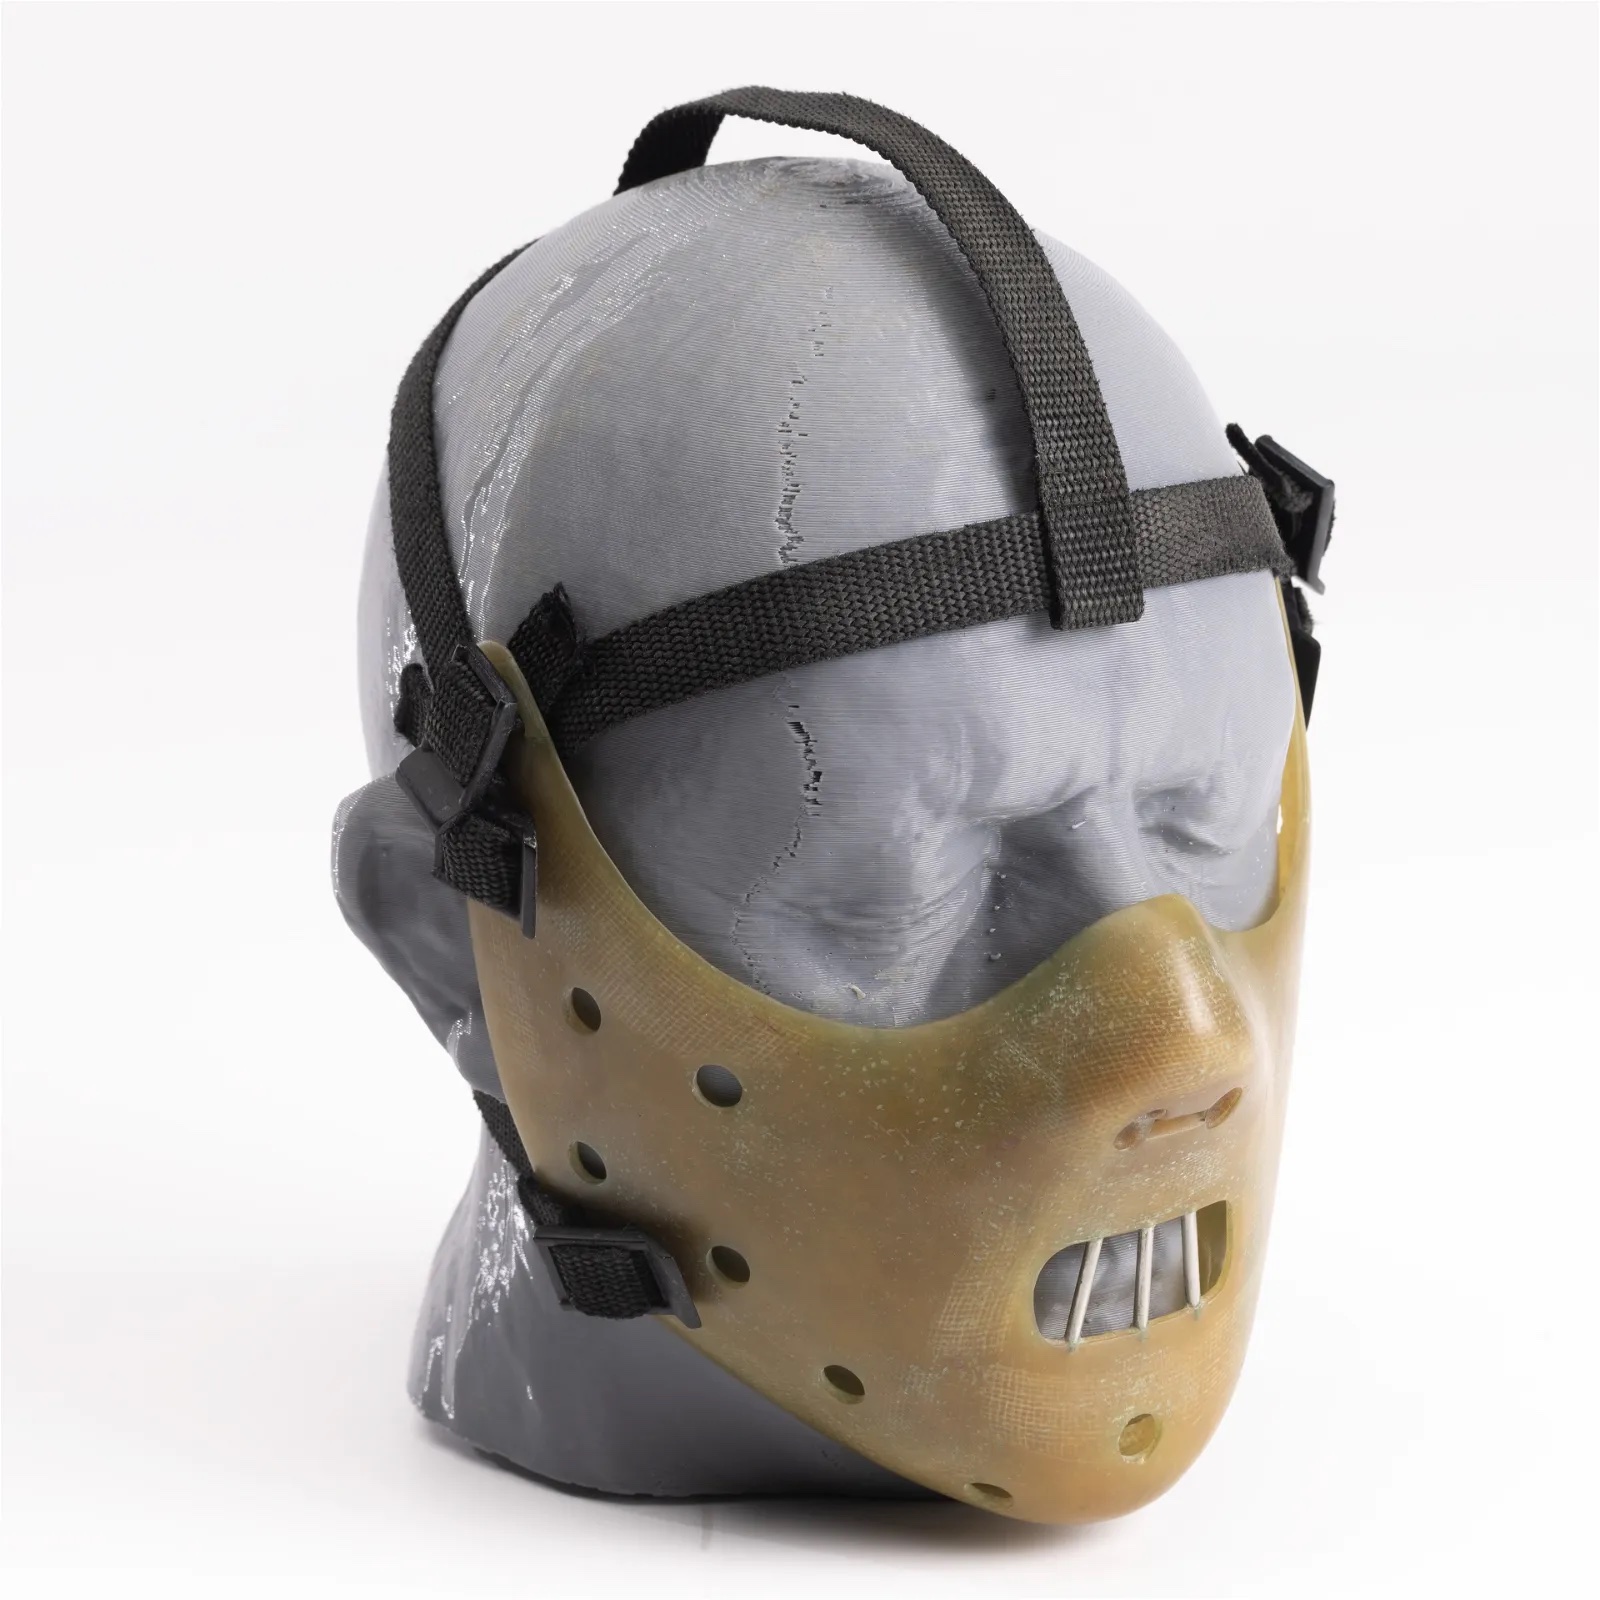 Screen-worn bite-restraint mask of Hannibal Lecter from 'Silence of the Lambs,' which sold for $170,000 ($221,000 with buyer’s premium) at Studio Auctions.